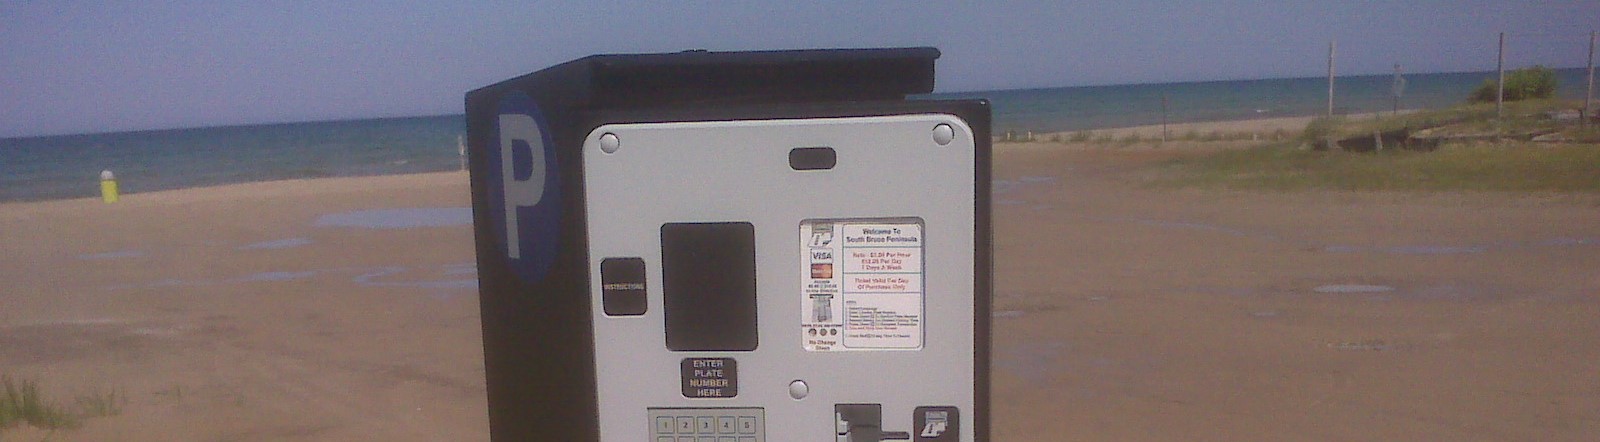 Photo of paid parking machine at Sauble Beach